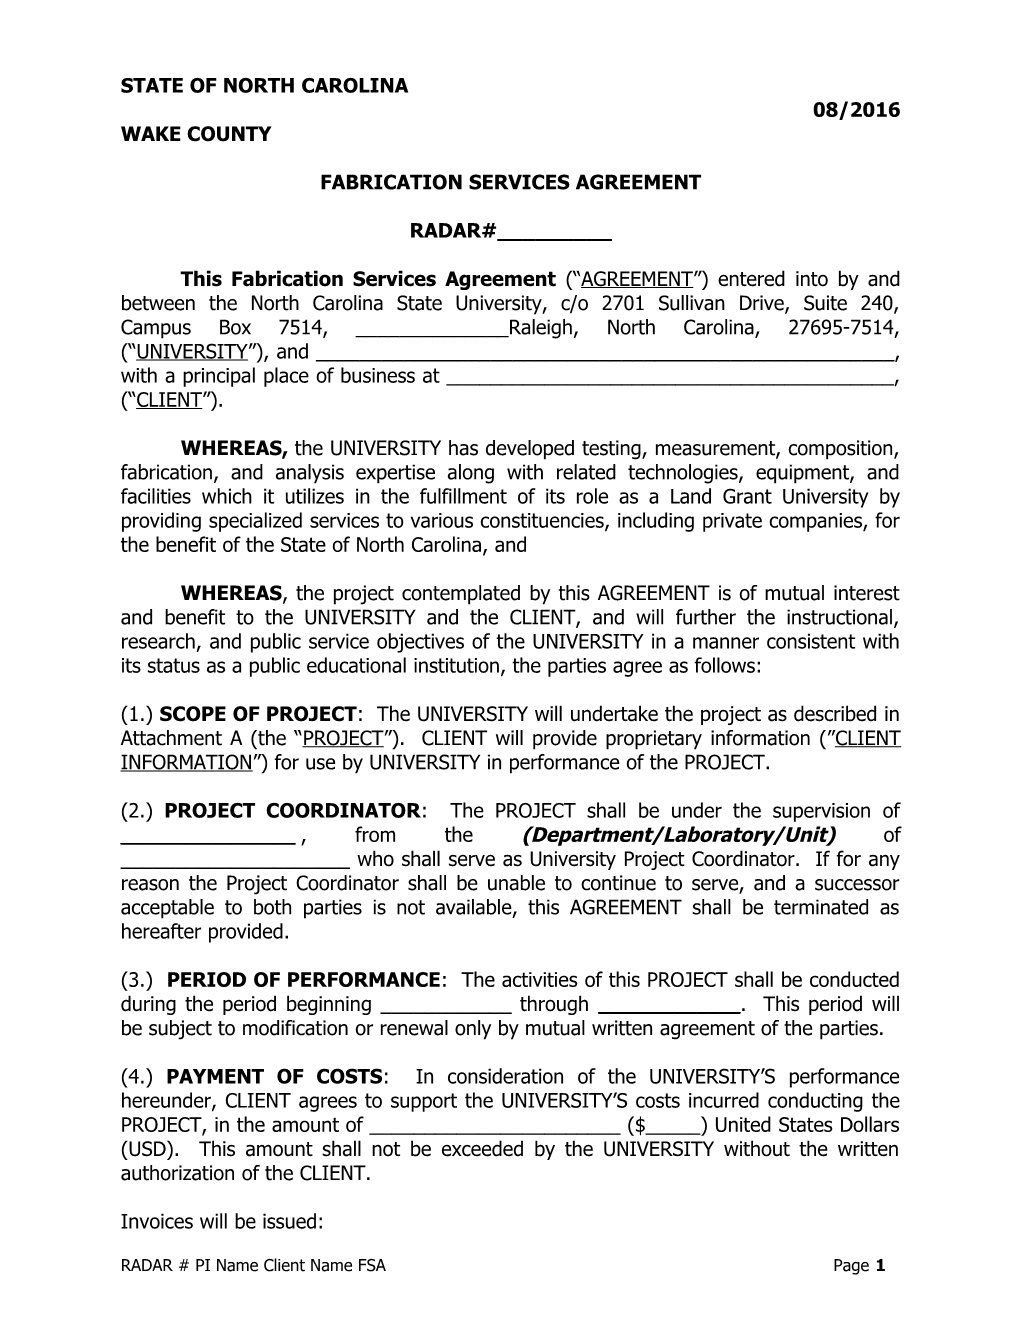 Fabrication Services Agreement (N0014111;1)